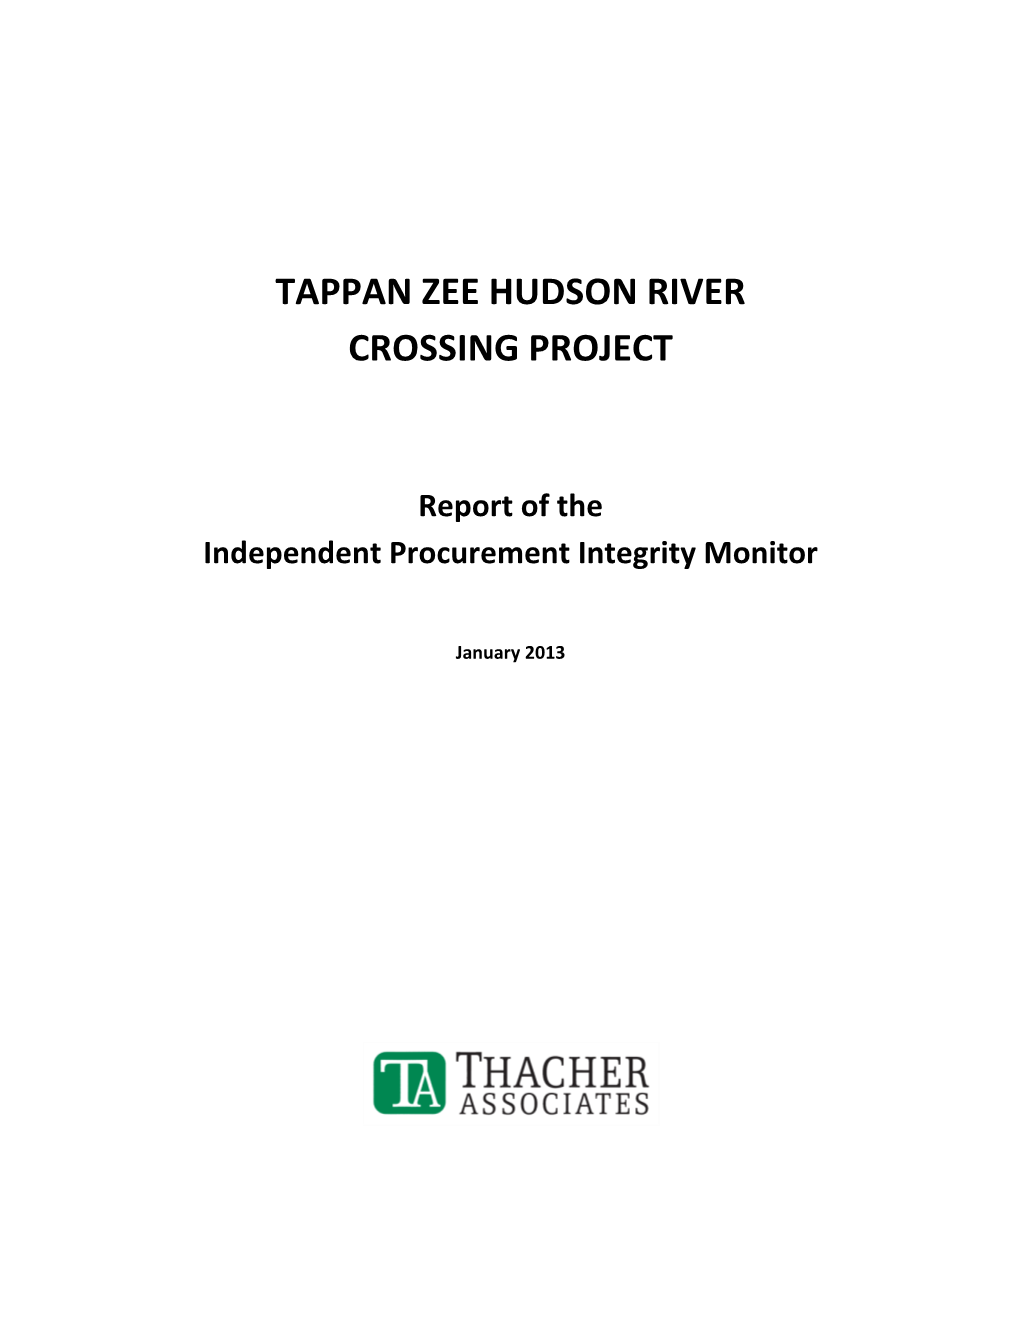 Report of the Independent Procurement Integrity Monitor